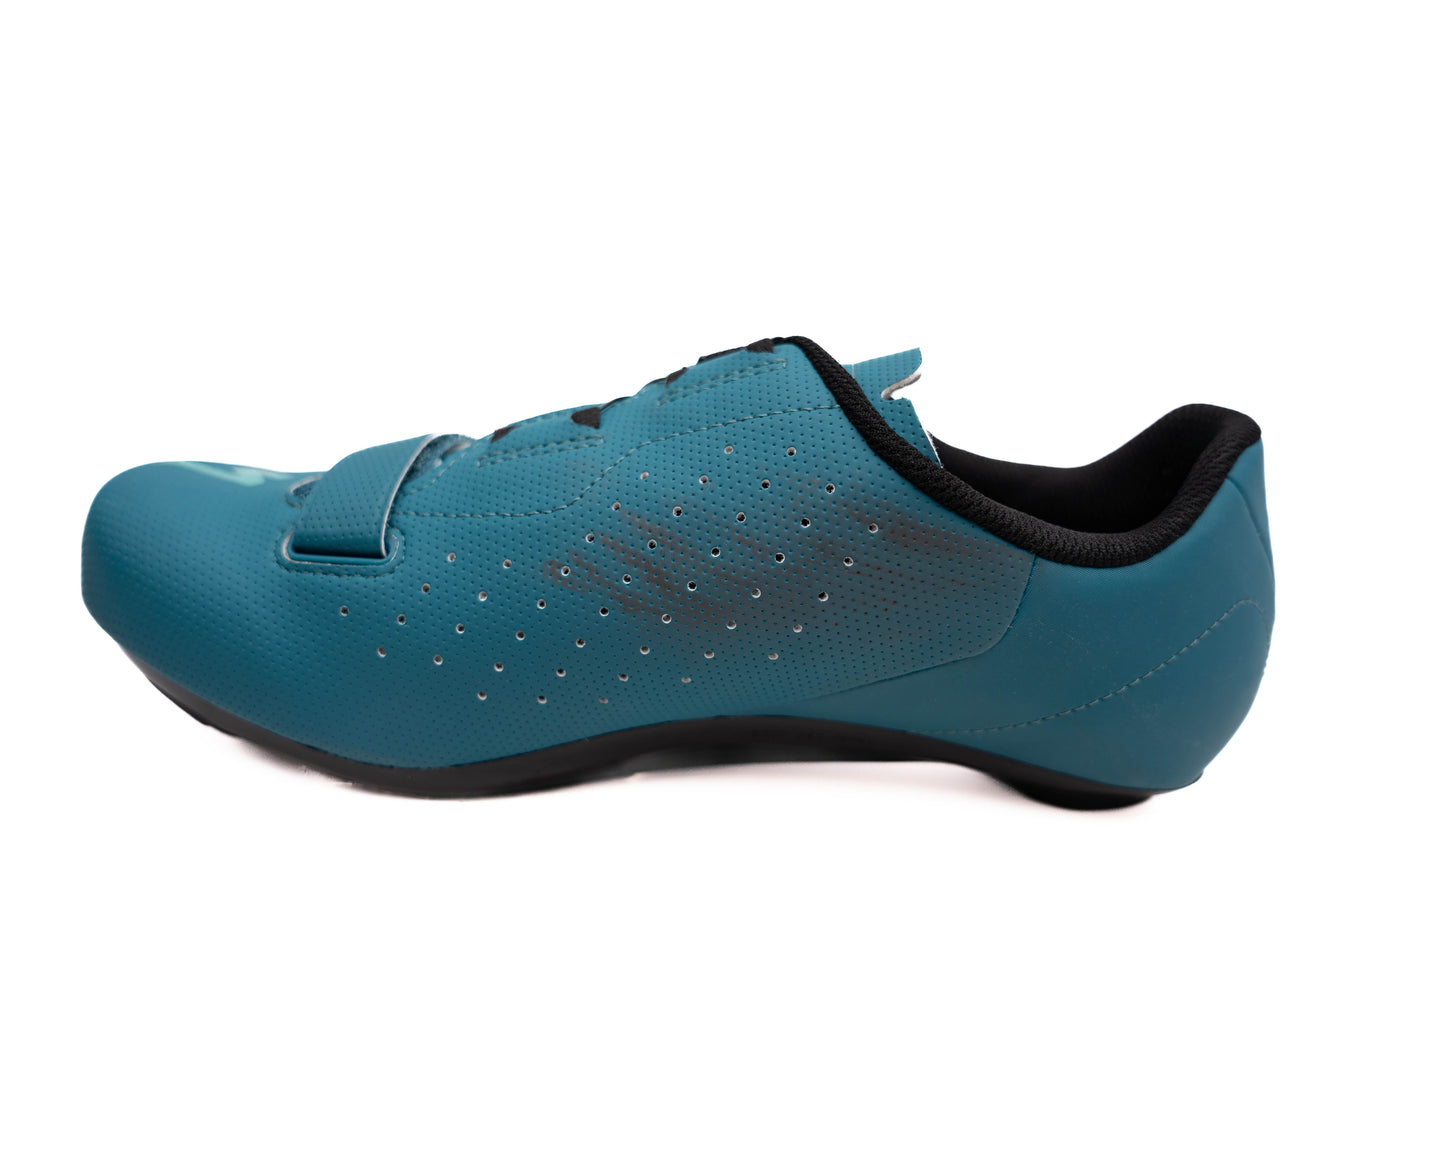 Specialized Torch 1.0 Road Shoe TropTeal/LgnBlu 41 (New Other)